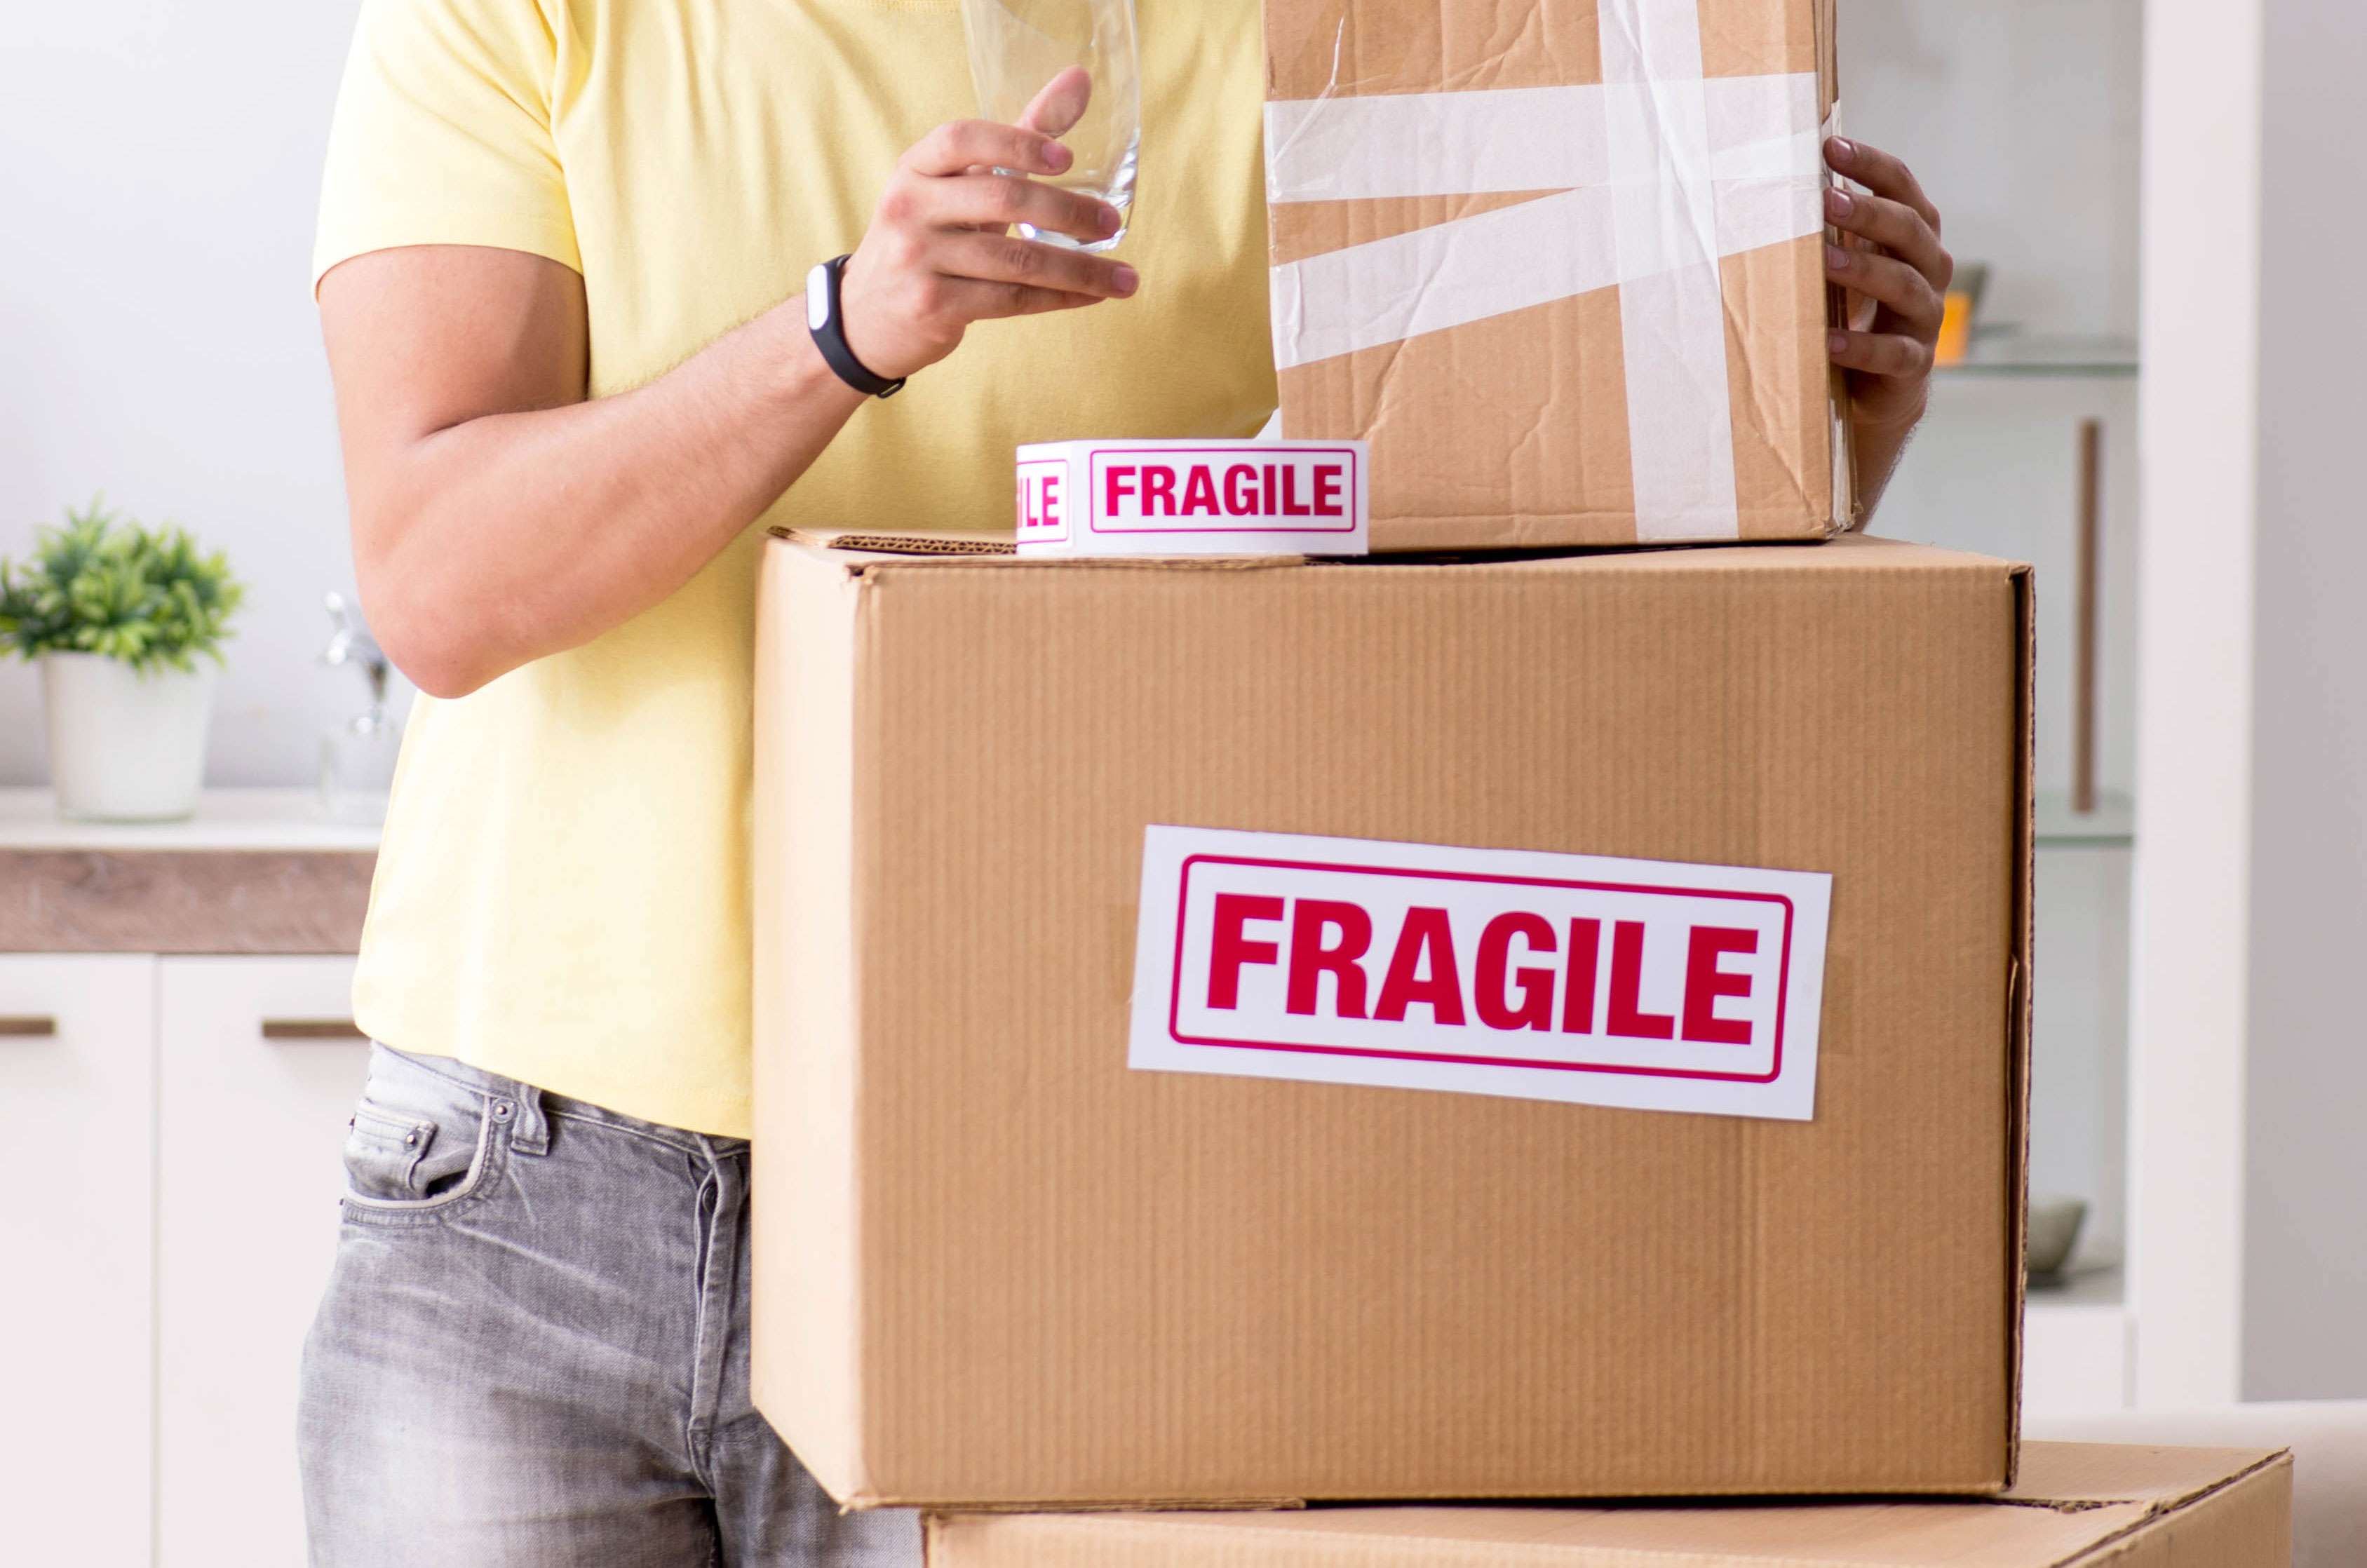 Moving Art Gallery - Fragile Items